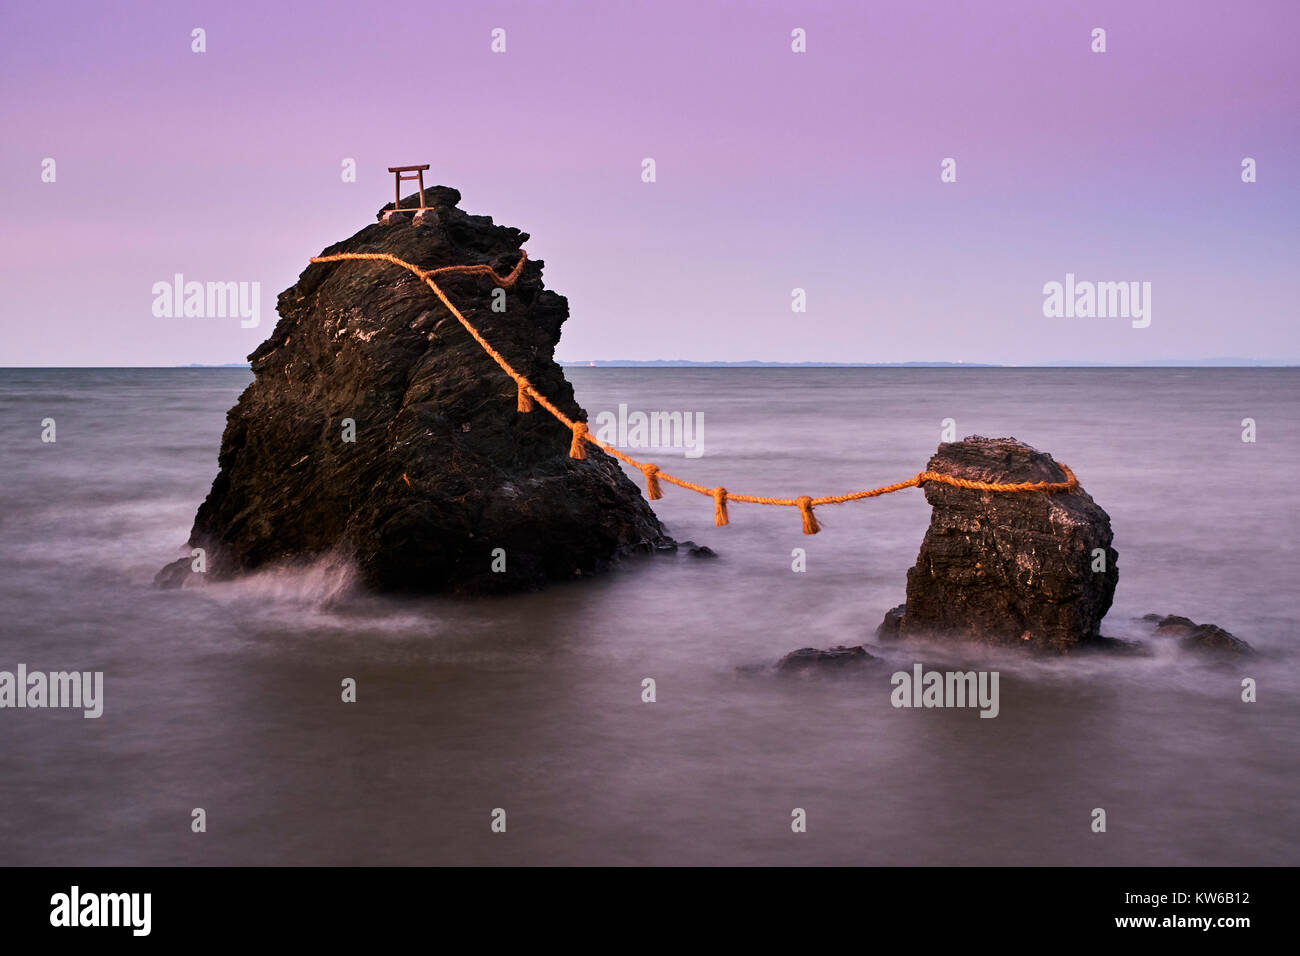 Japan, Honshu island, Ise Shima, Mie region, Futami, Meoto-Iwa (Wedded Rocks), two rocks considered to be male and female, joined in matrimony by shim Stock Photo